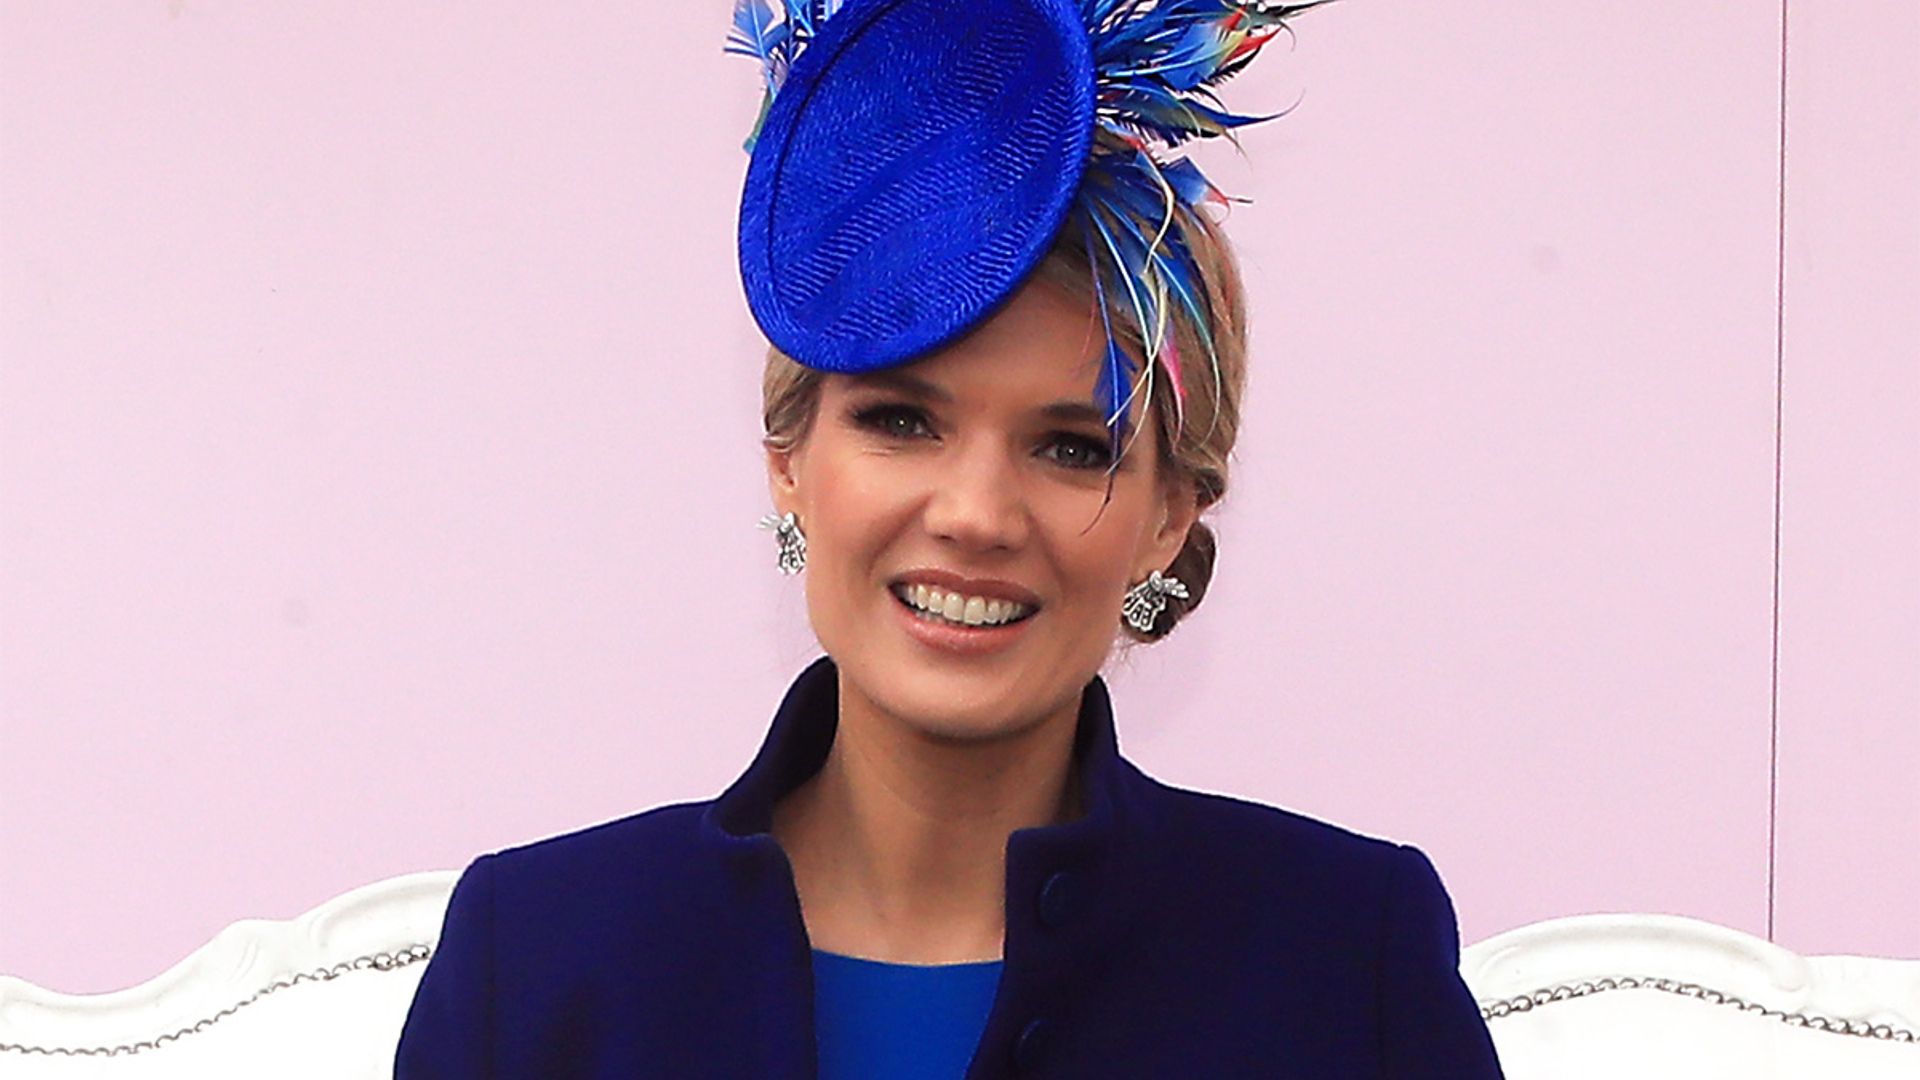 Charlotte Hawkins gears up for the Grand National in stunning outfit at Aintree